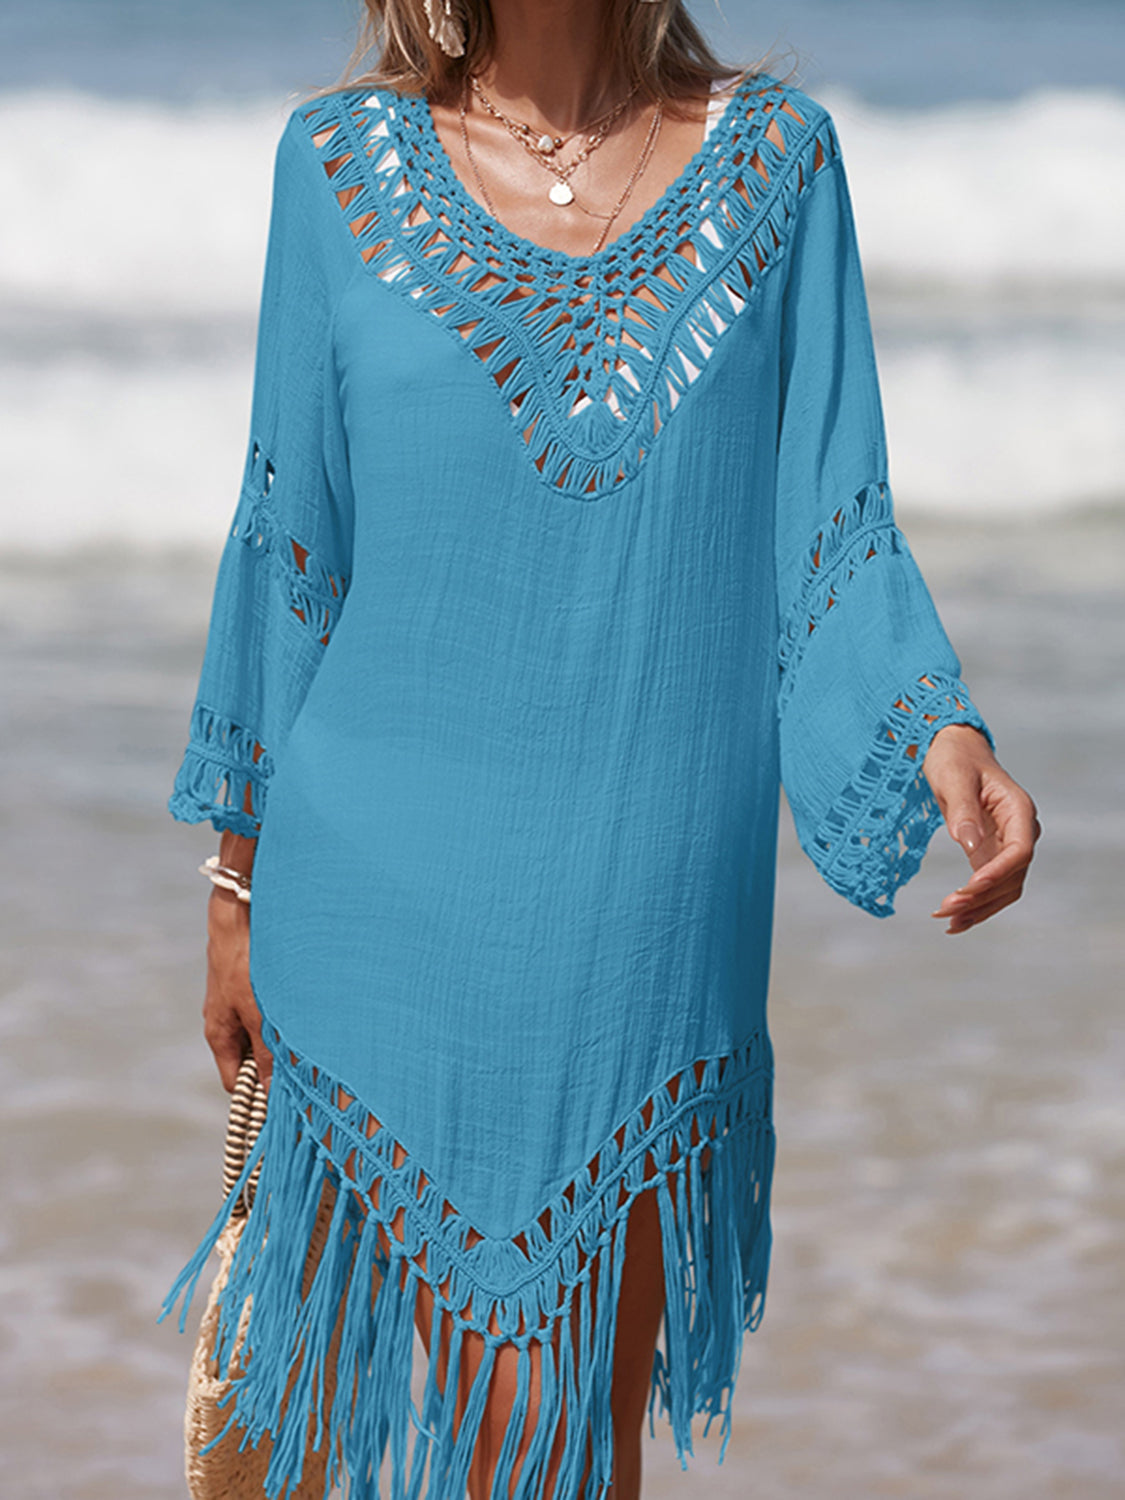 Cutout Fringe Scoop Neck Cover-Up Sky Blue One Size